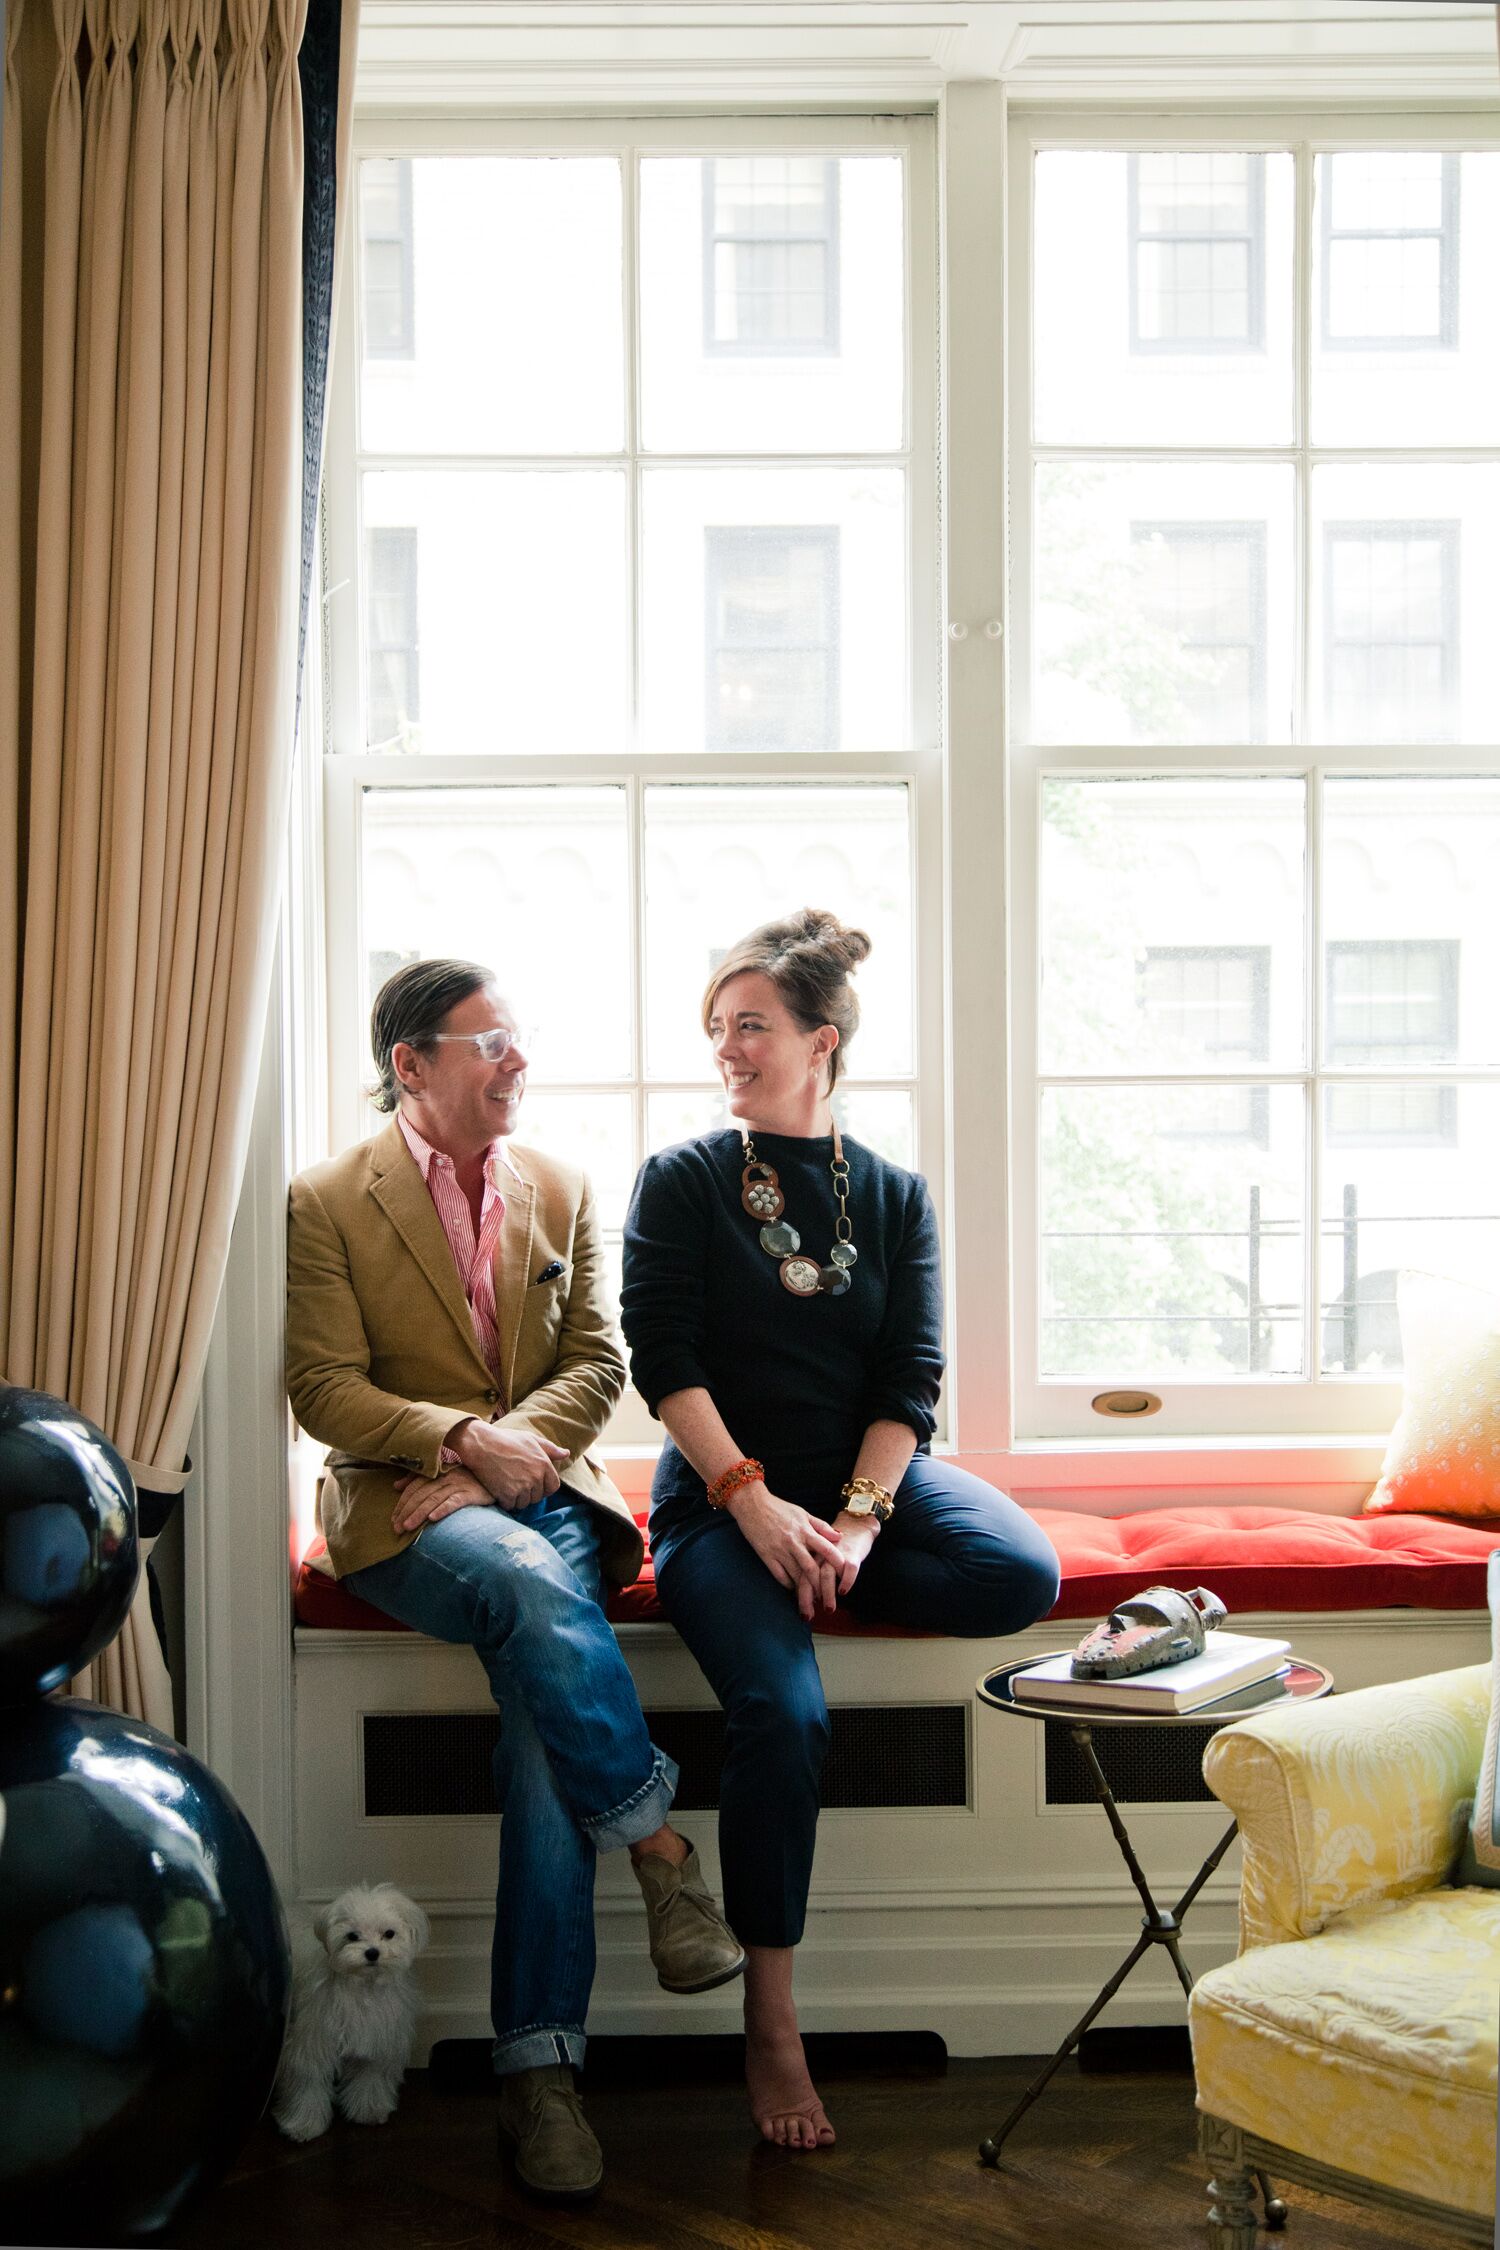 kate-andy-spade-home-new-york-city-apartment-portrait